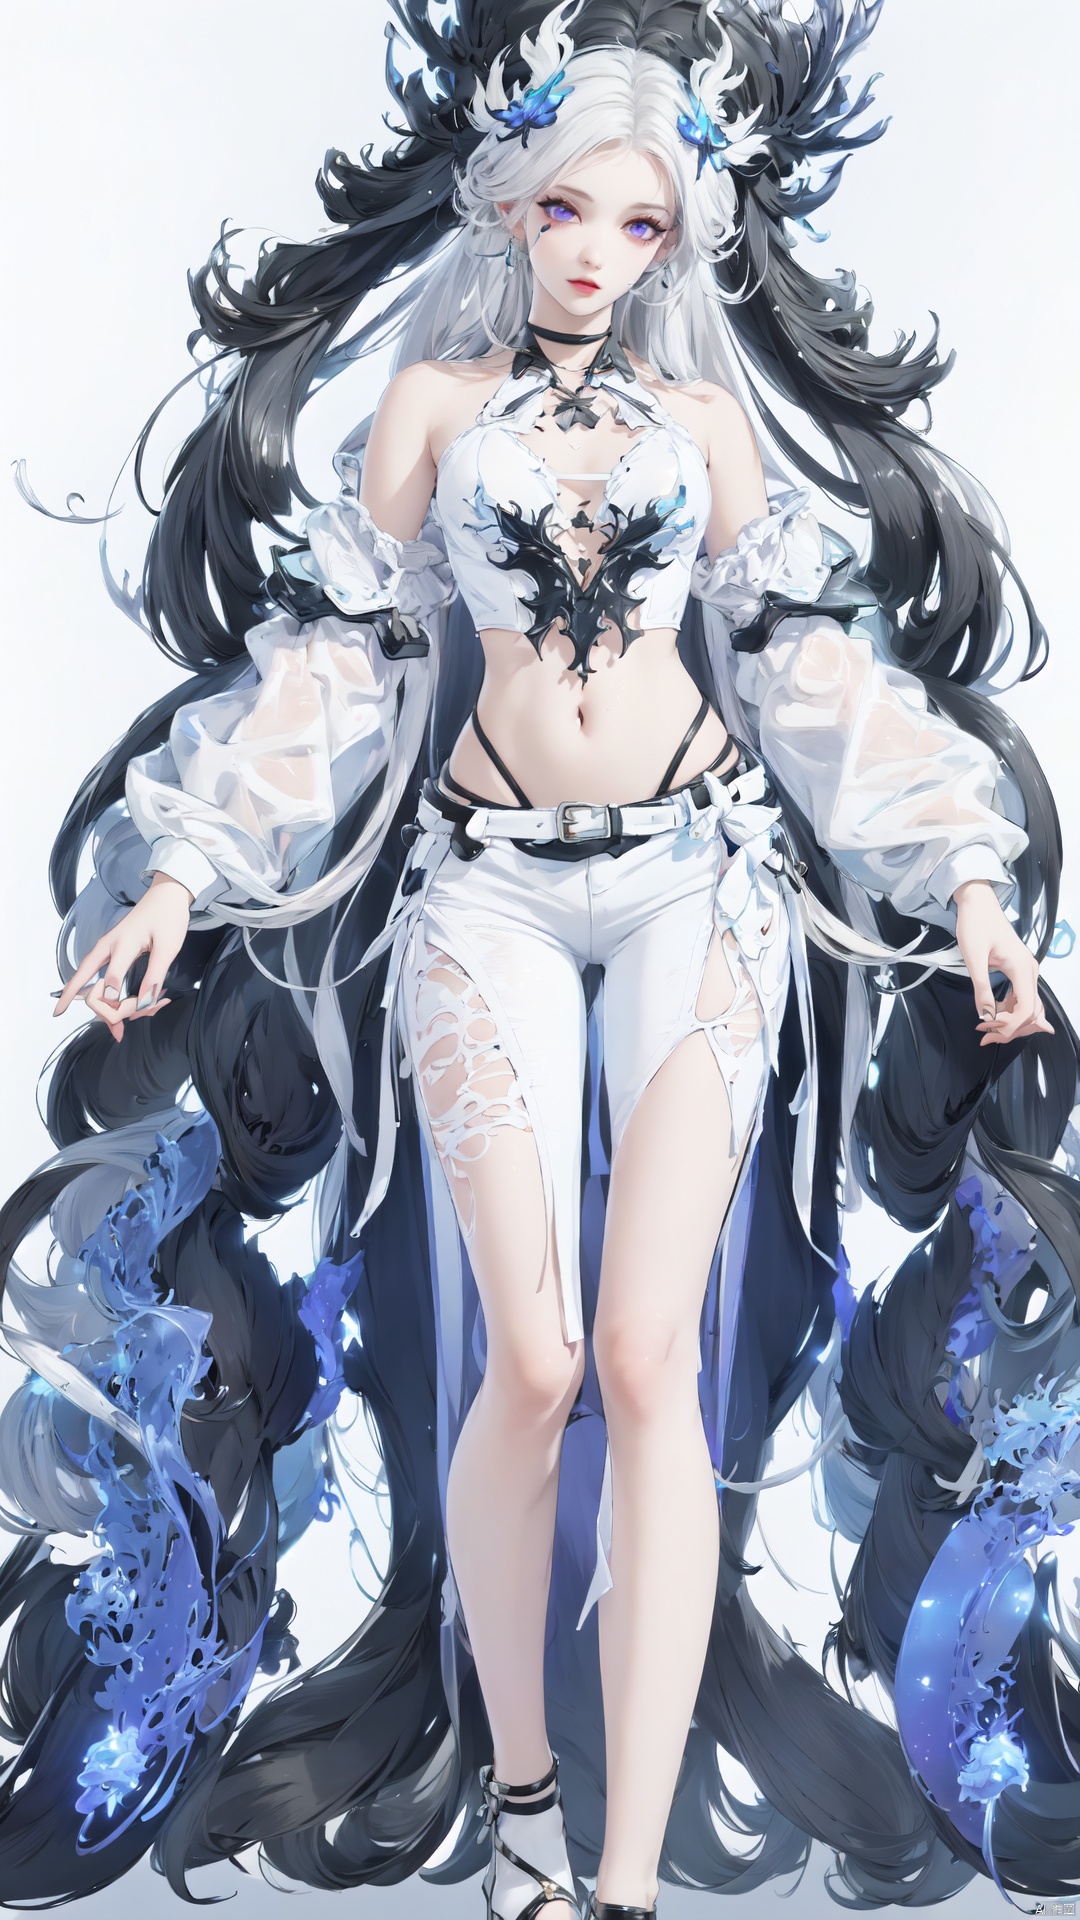  A girl, delicate makeup, (full body:1.4), colorful hair,long legs, delicate eye makeup,colorful hair,purple eyes, silver hair,fair skin,blisters, glowing jellyfish,(white background:1.4), fantasy style, beautiful illustration, White shiny clothes,complex composition, floating long hair, seven colors,Keywords delicate skin, luster, liquid explosion, Elegant clothes, Glowing shells,glowing seabed,streamer,1girl,smoke,colorfulveil,colorful,Shifengji, ( Best Quality: 1.2 ), ( Ultra HD: 1.2 ), ( Ultra-High Resolution: 1.2 ), ( CG Rendering: 1.2 ), Wallpaper, Masterpiece, ( 36K HD: 1.2 ), ( Extra Detail: 1.1 ), Ultra Realistic, ( Detail Realistic Skin Texture: 1.2 ), ( White Skin: 1.2 ), Focus, Realistic Art,fantasy,girl, yingjacket and yingshorts